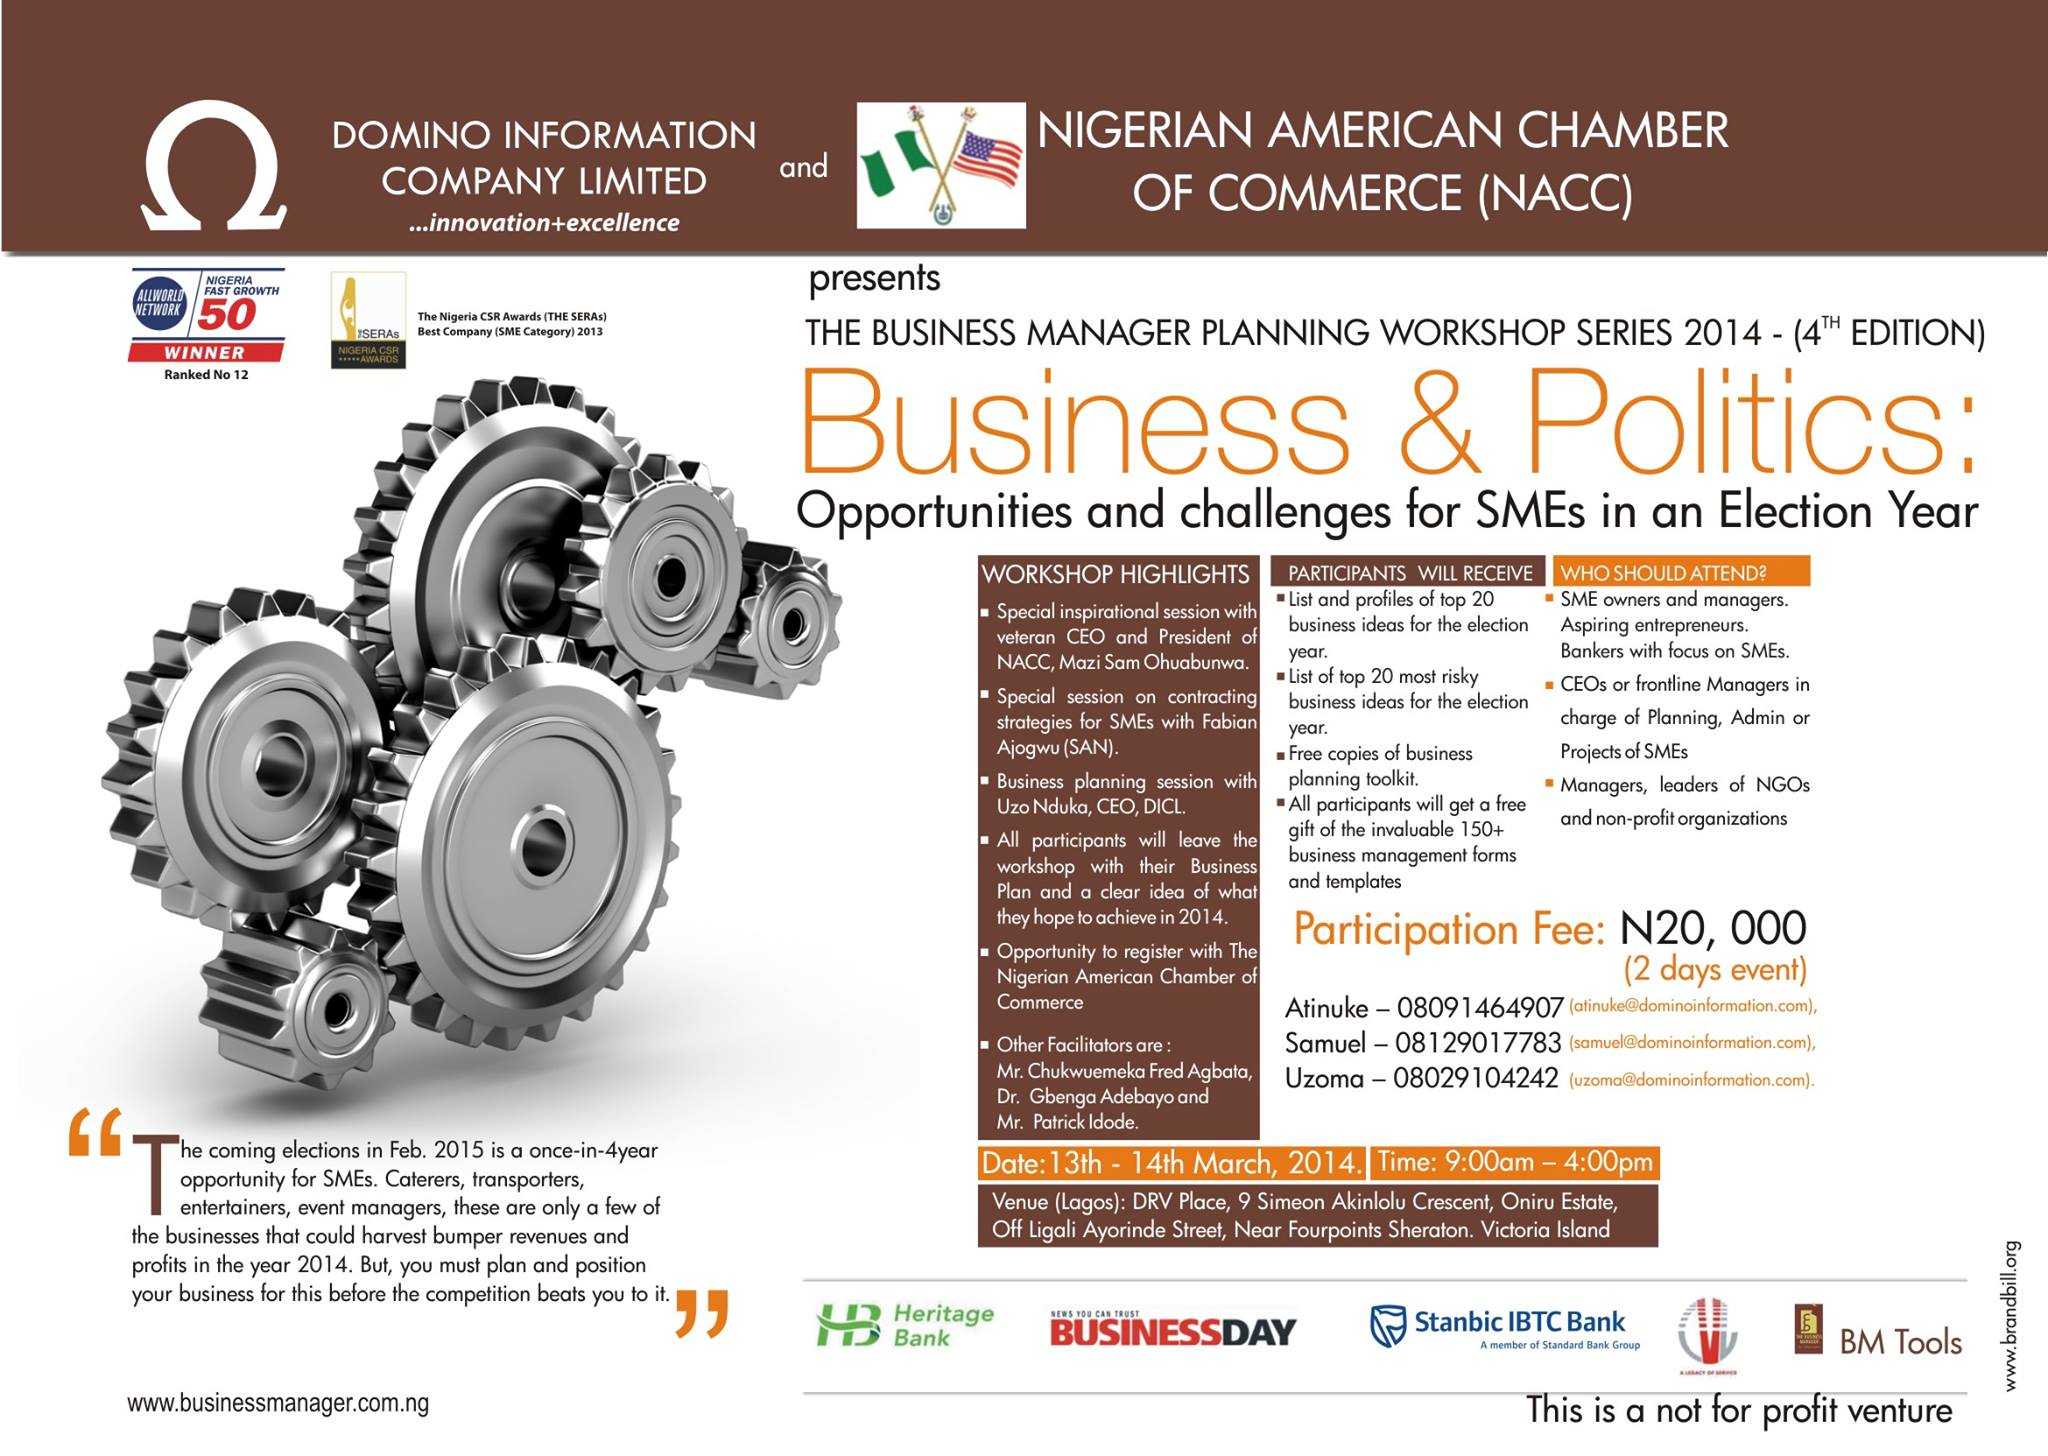 An Invitation to Attend the Business Manager Planning Workshop